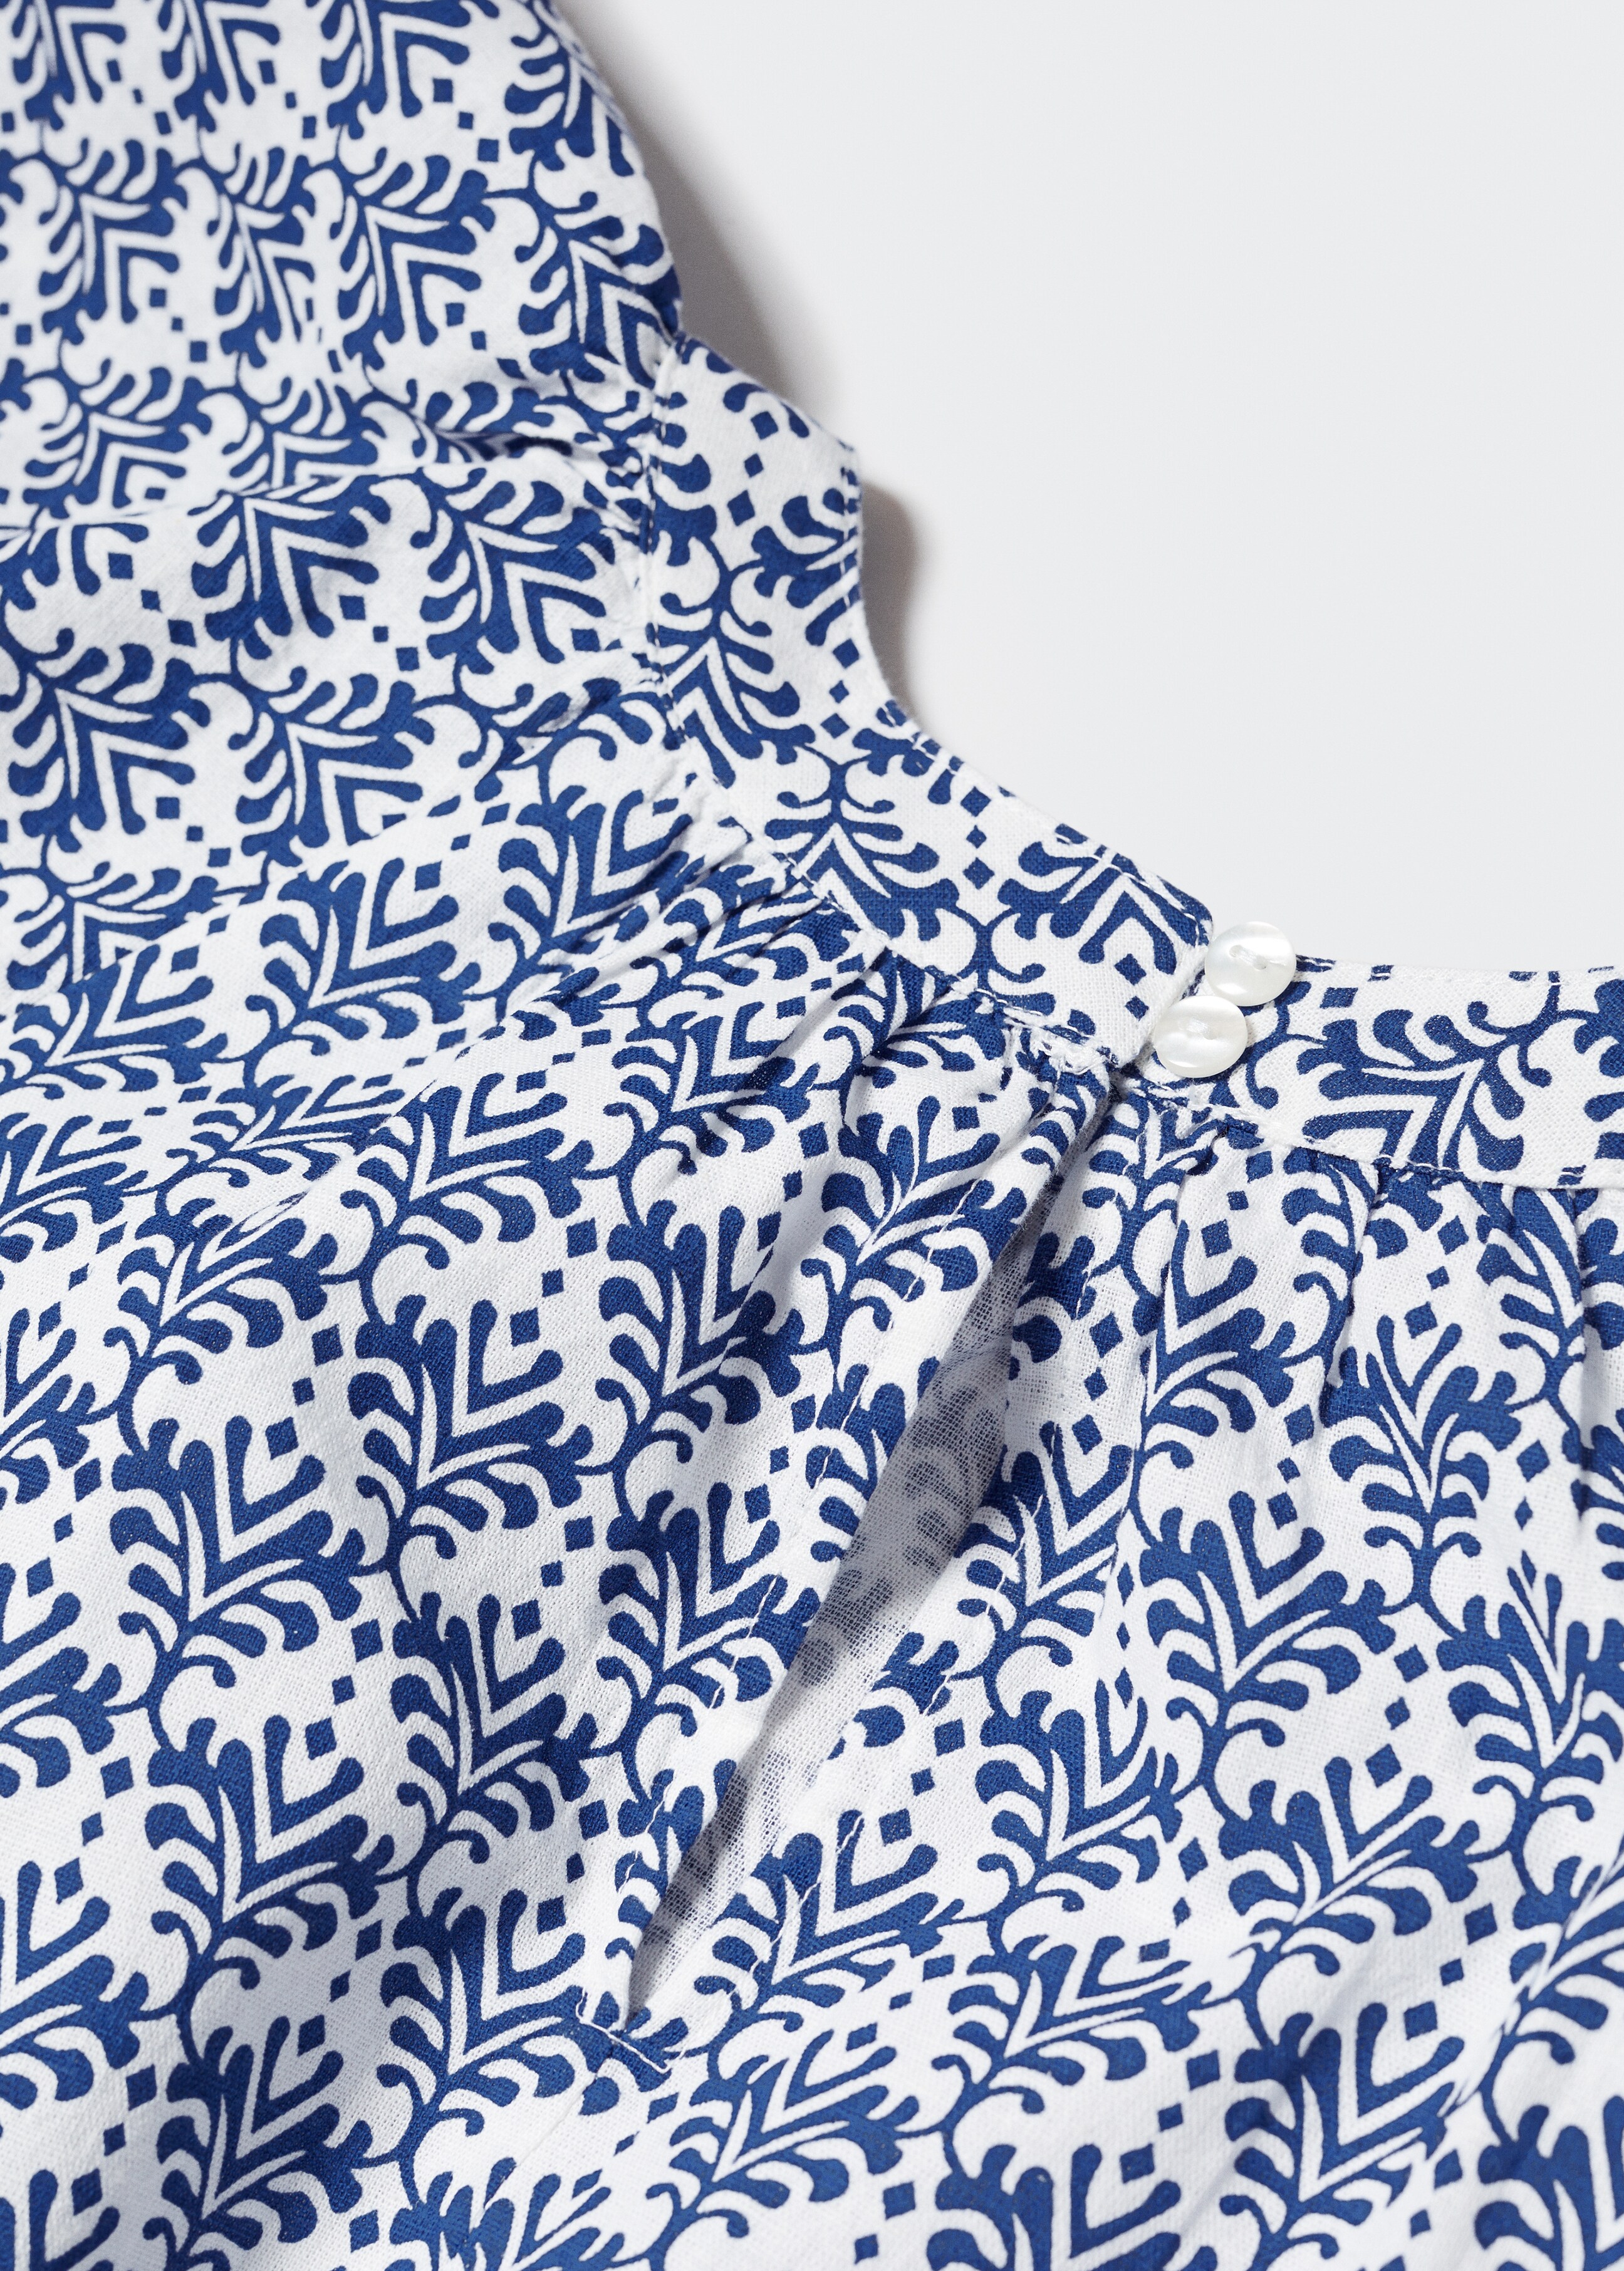 Printed dress - Details of the article 8